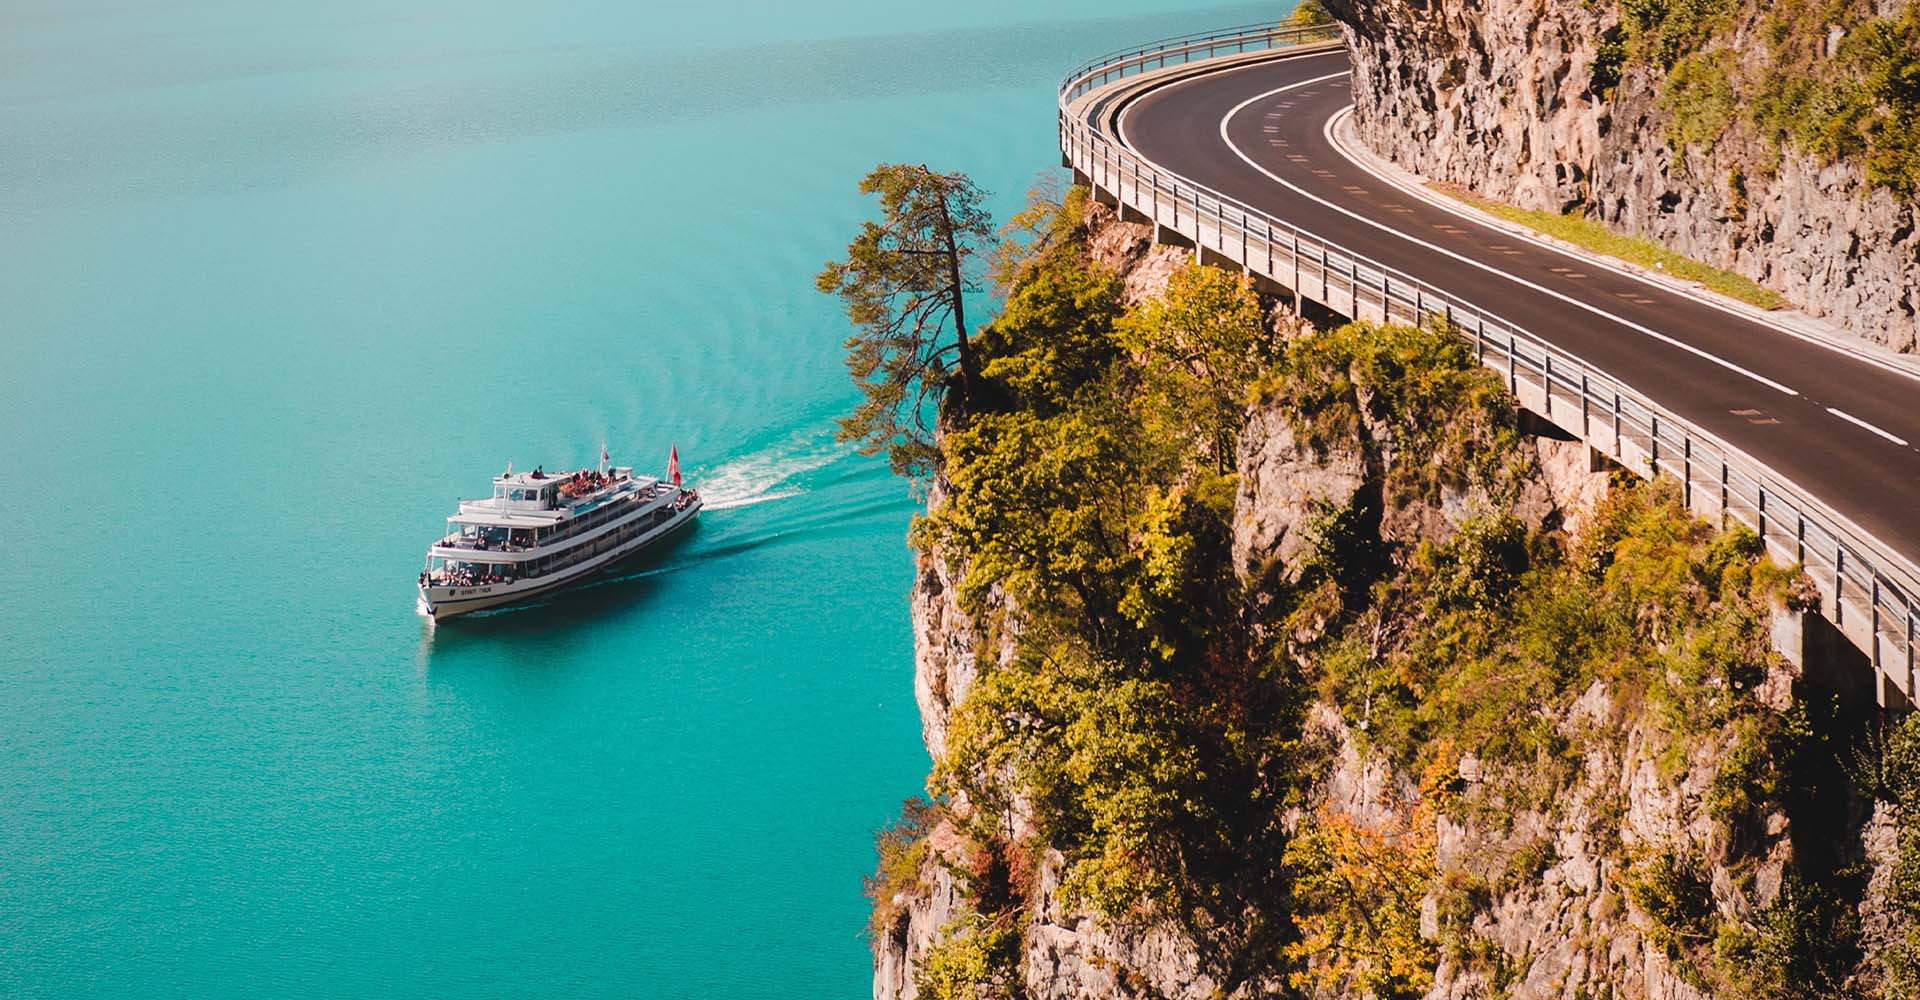 A photo of a winding road near a cliff with a cruise ship in the distance